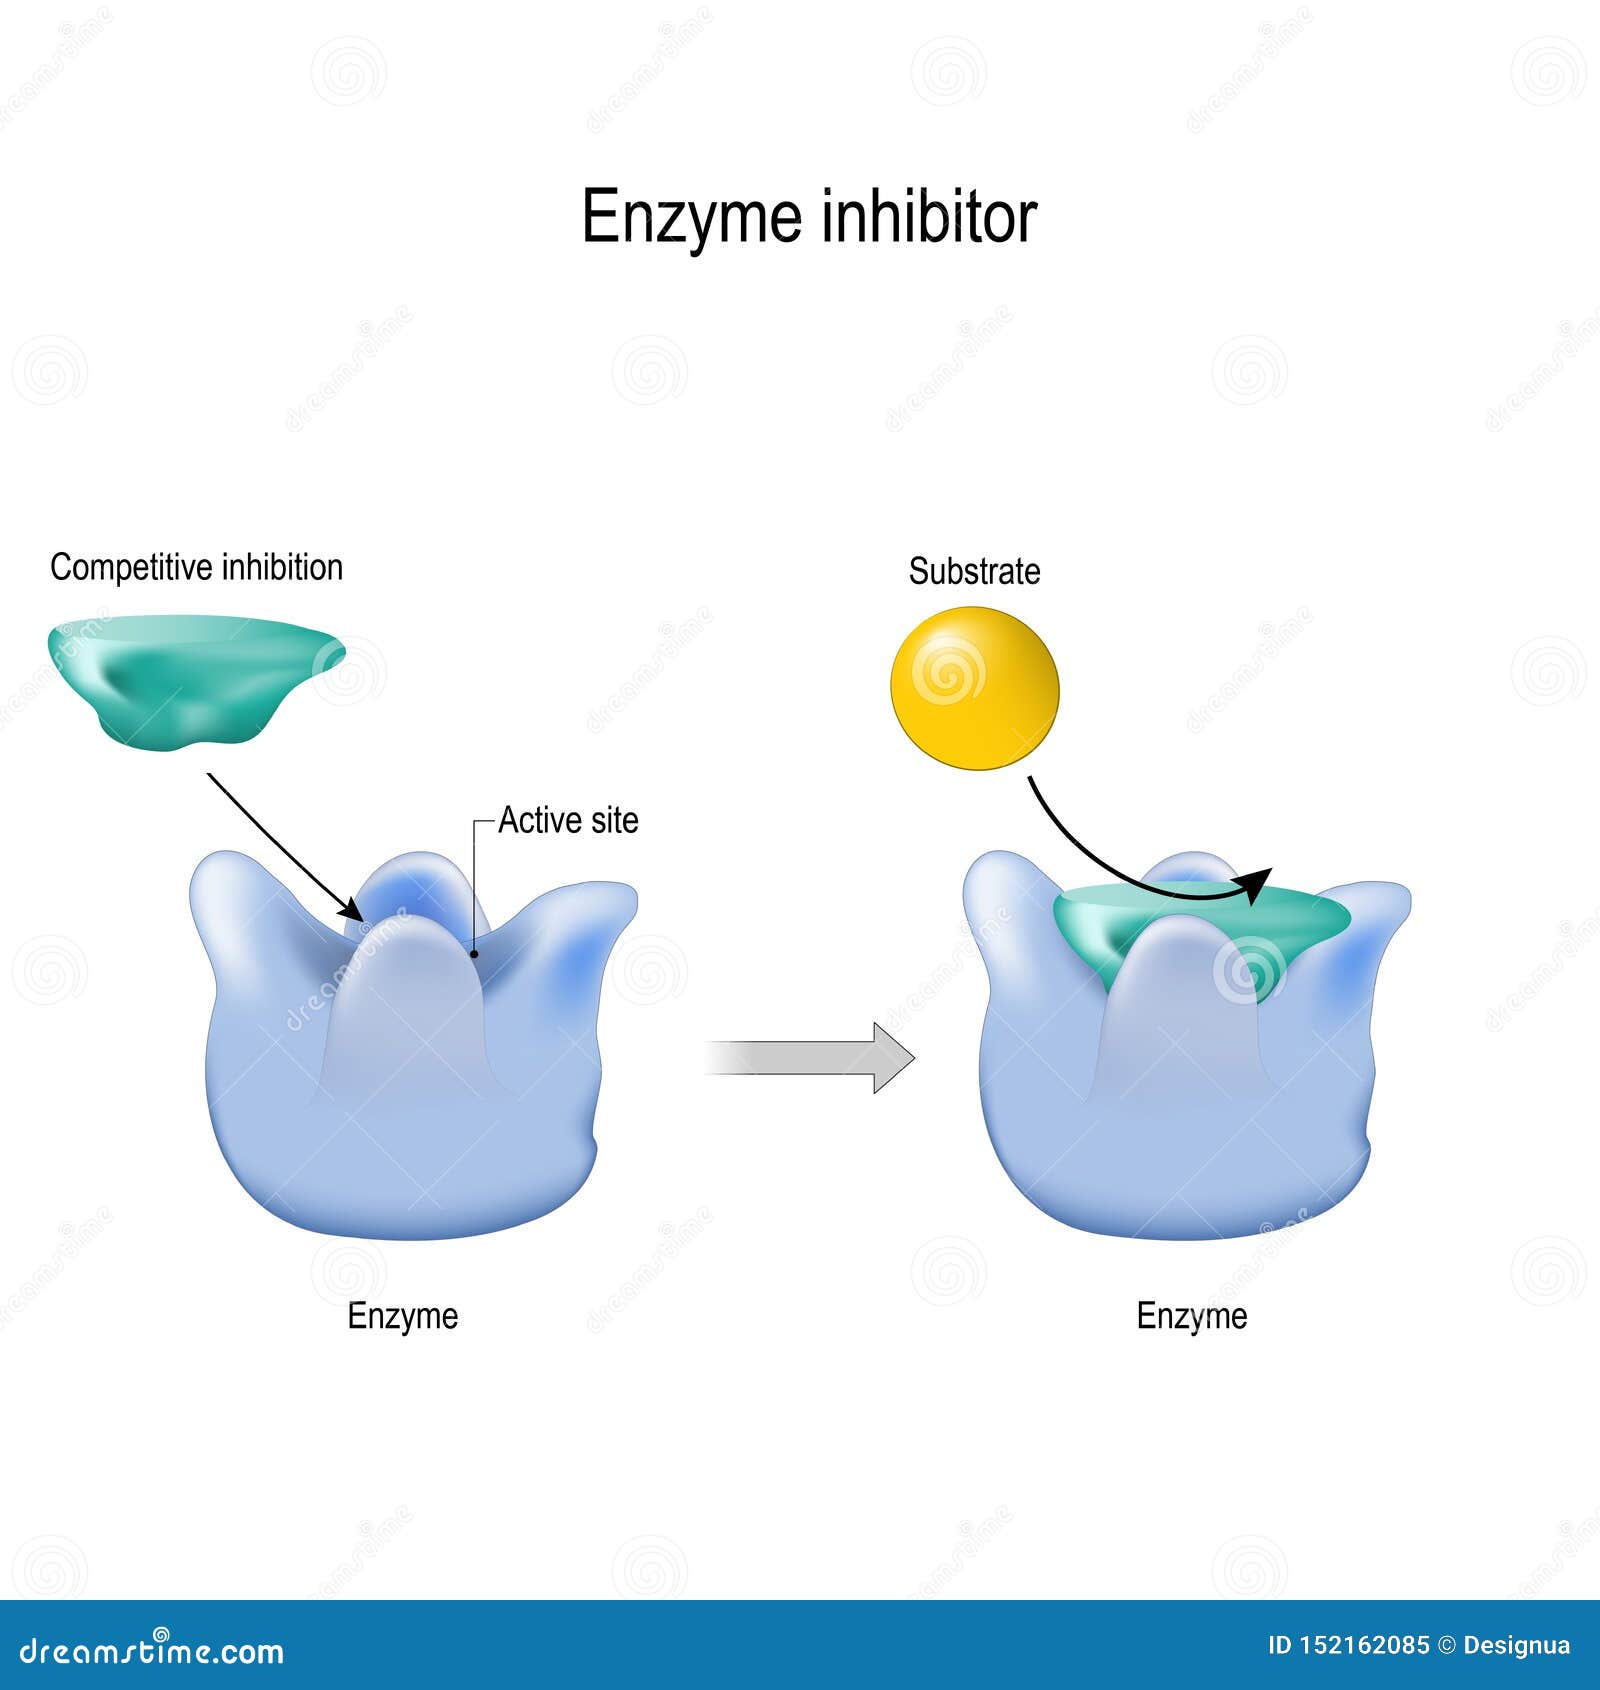 competitive inhibition. enzyme inhibitor is a molecule that binds blocking to an enzyme and decreases its activity